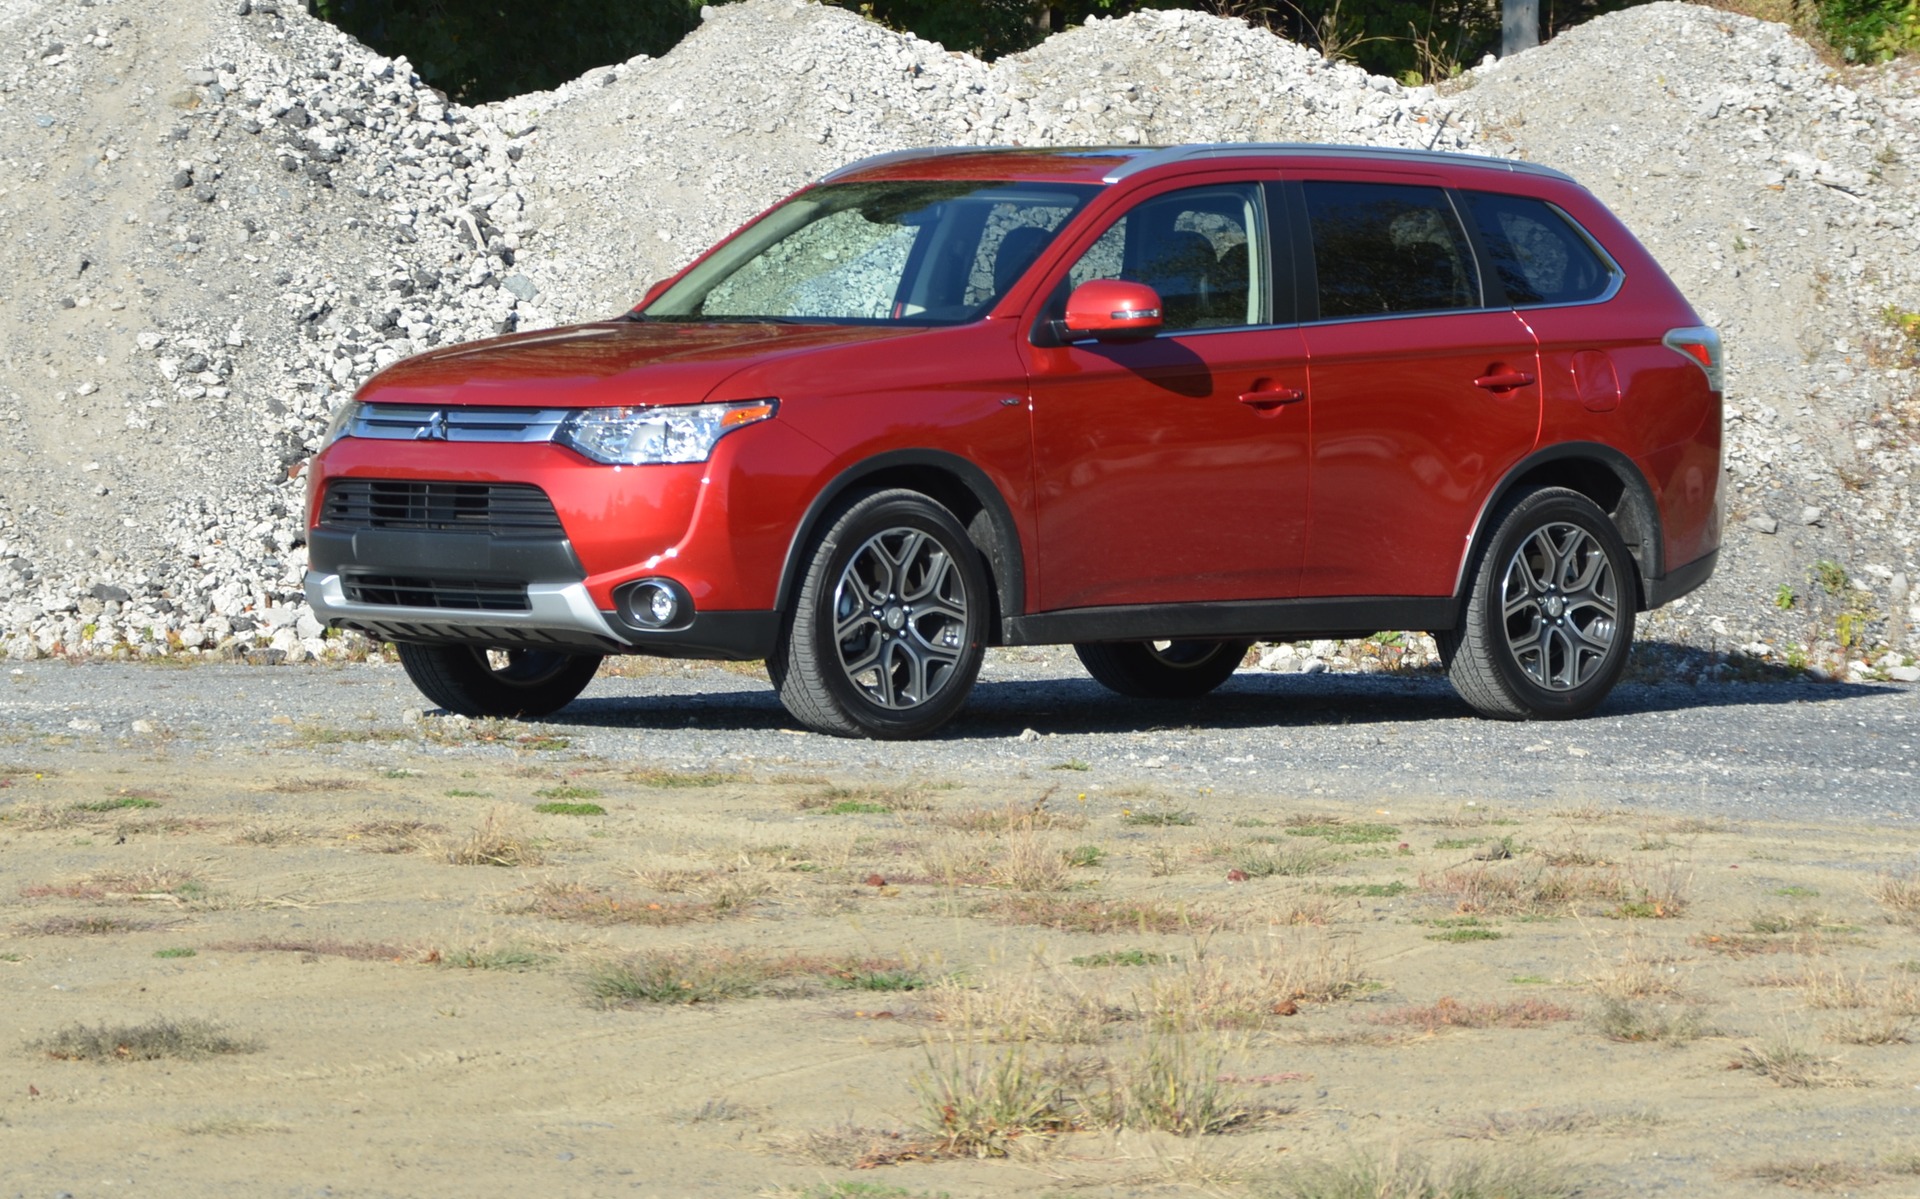 2015 Mitsubishi Outlander Review, Pricing, & Pictures